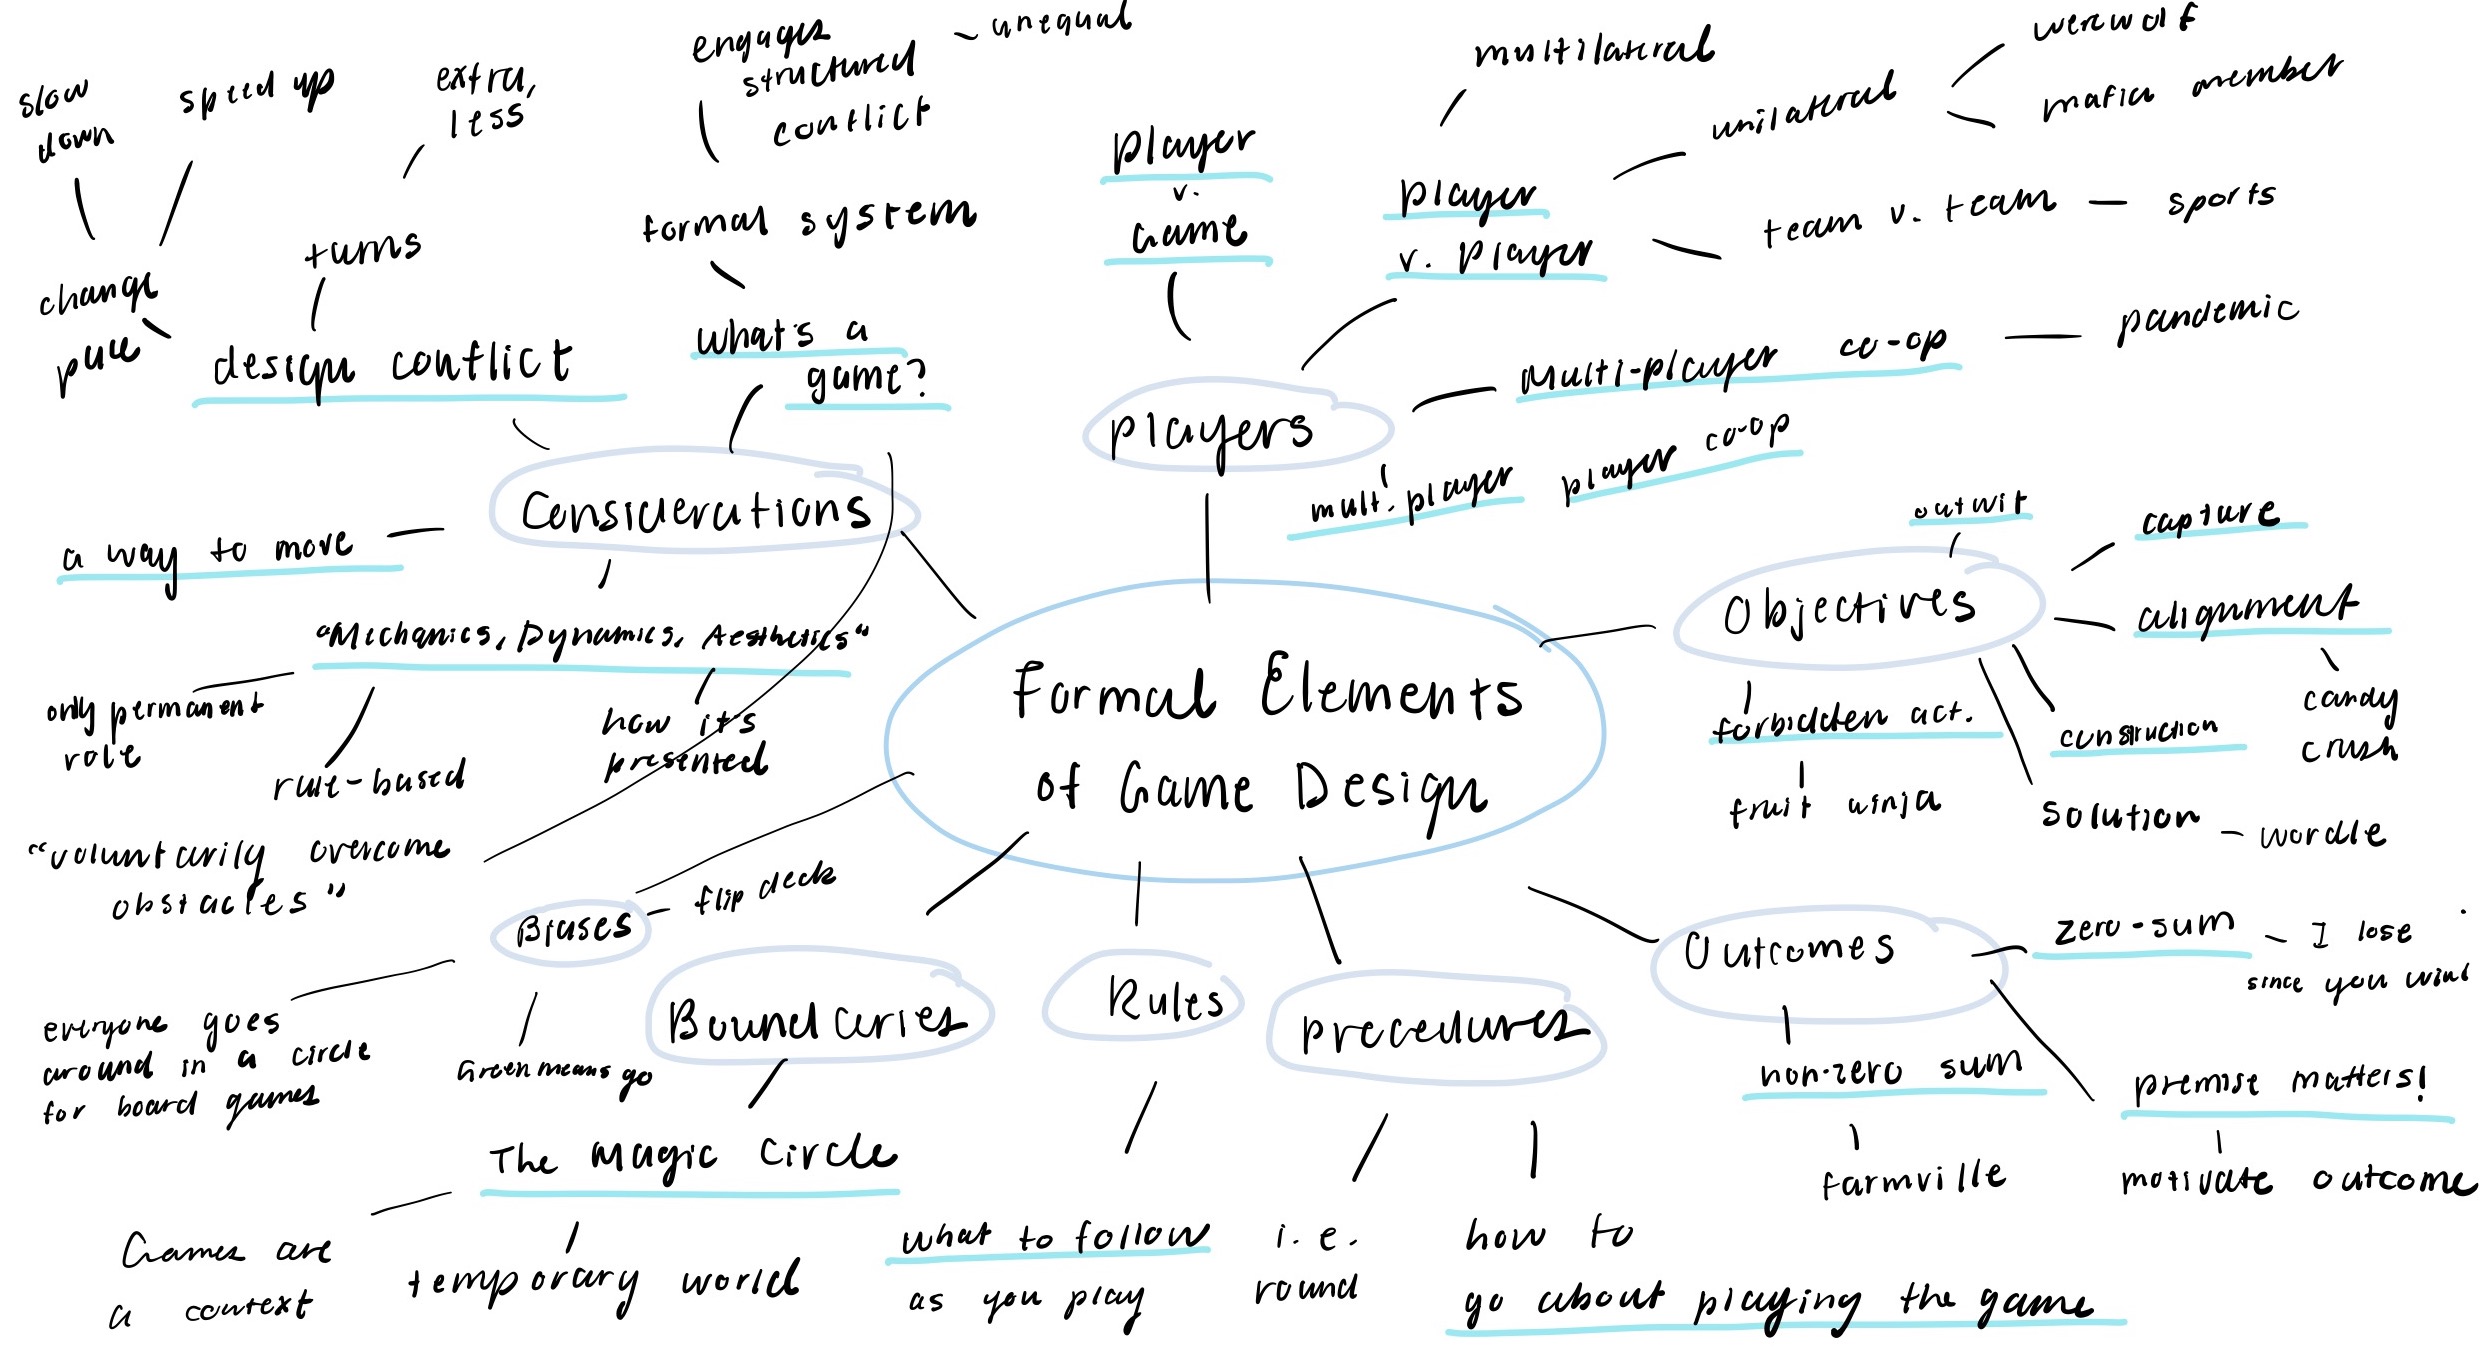 A mindmap of the formal elements of game design